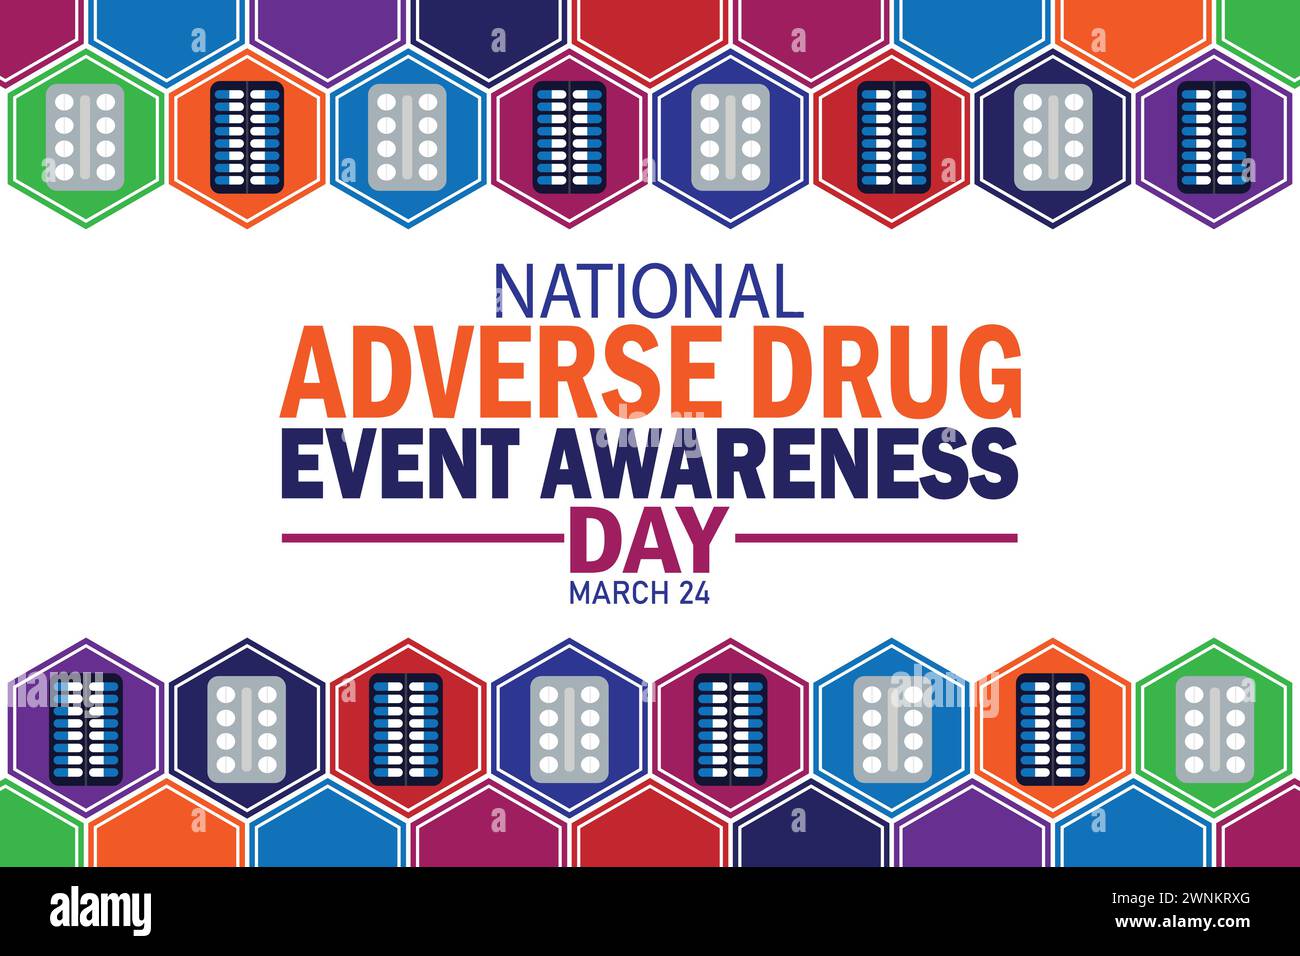 National Adverse Drug Event Awareness Day wallpaper with typography. National Adverse Drug Event Awareness Day, background Stock Vector